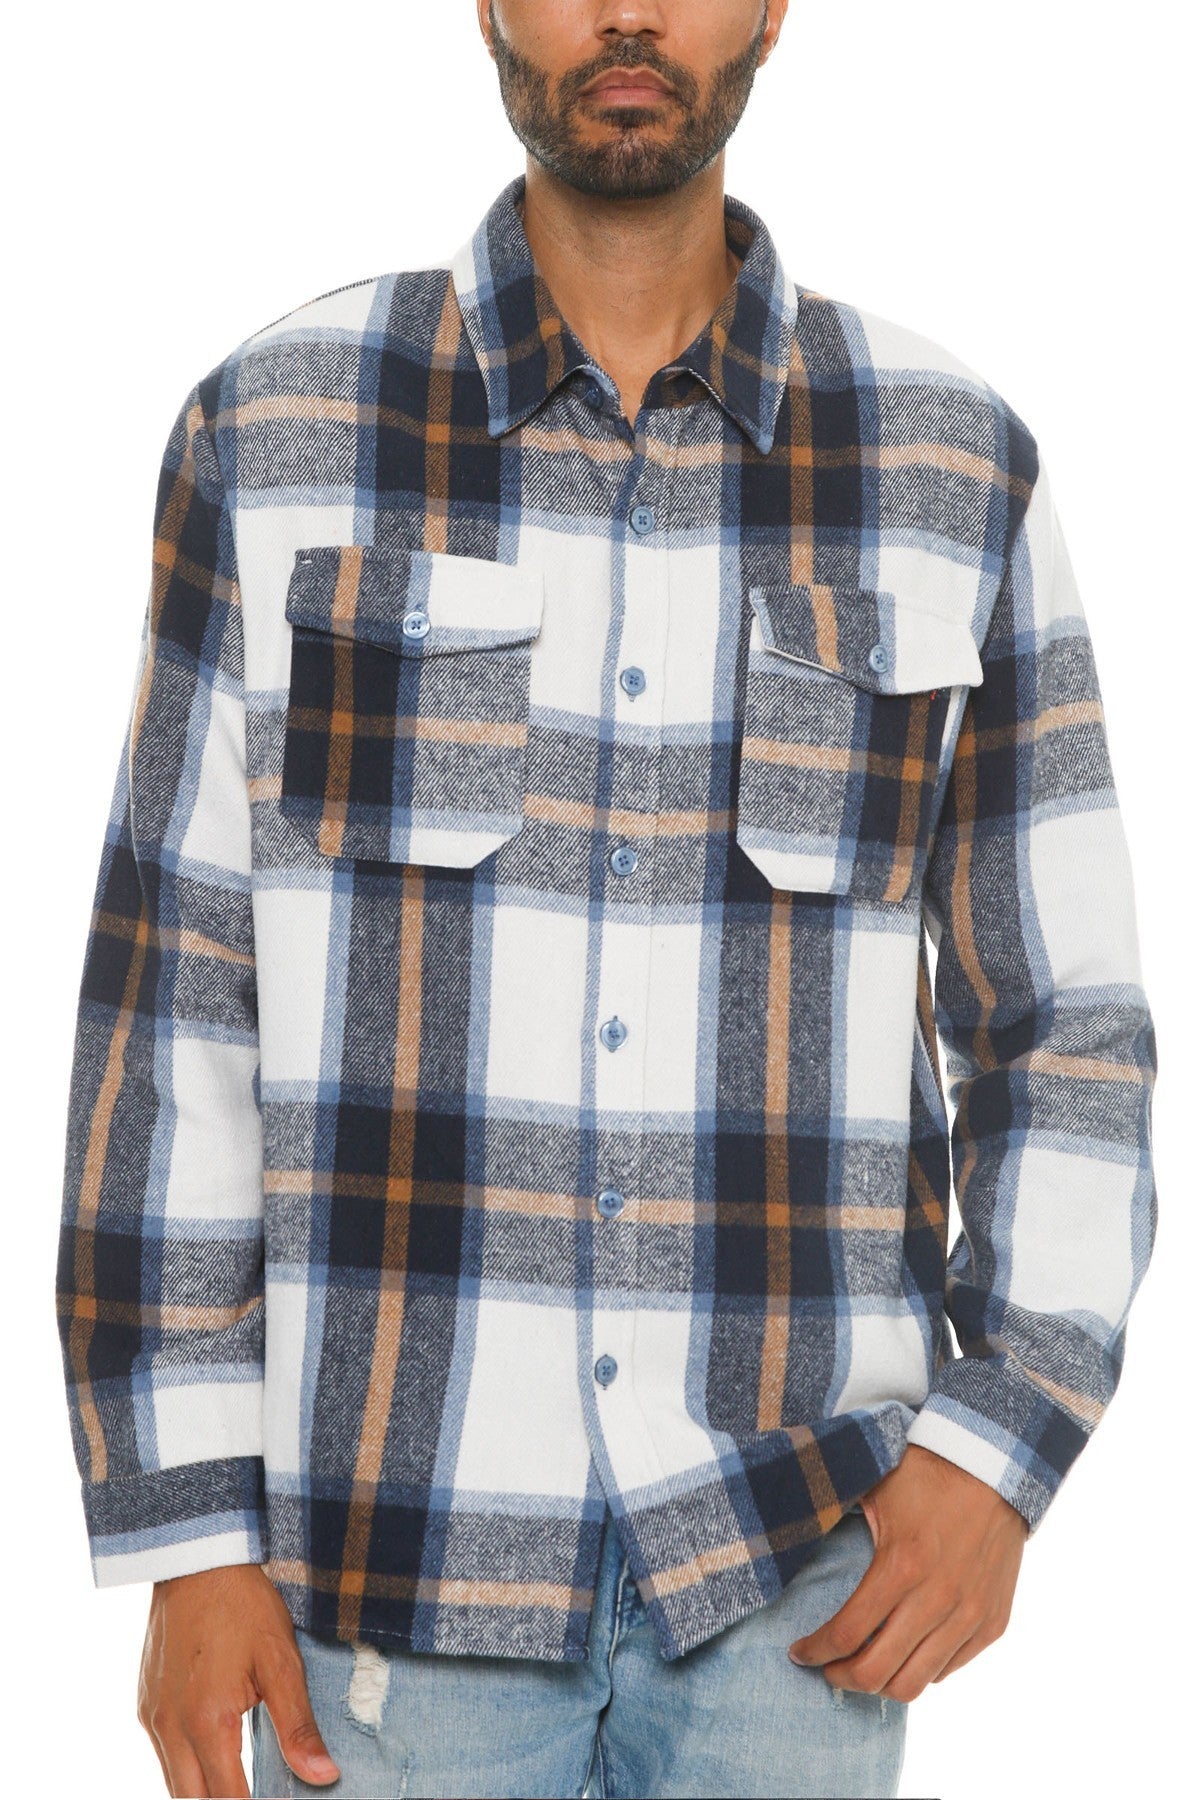 Blue/Gold - Men's Checkered Soft Flannel Shacket - 8 colors - mens button-up shirt at TFC&H Co.